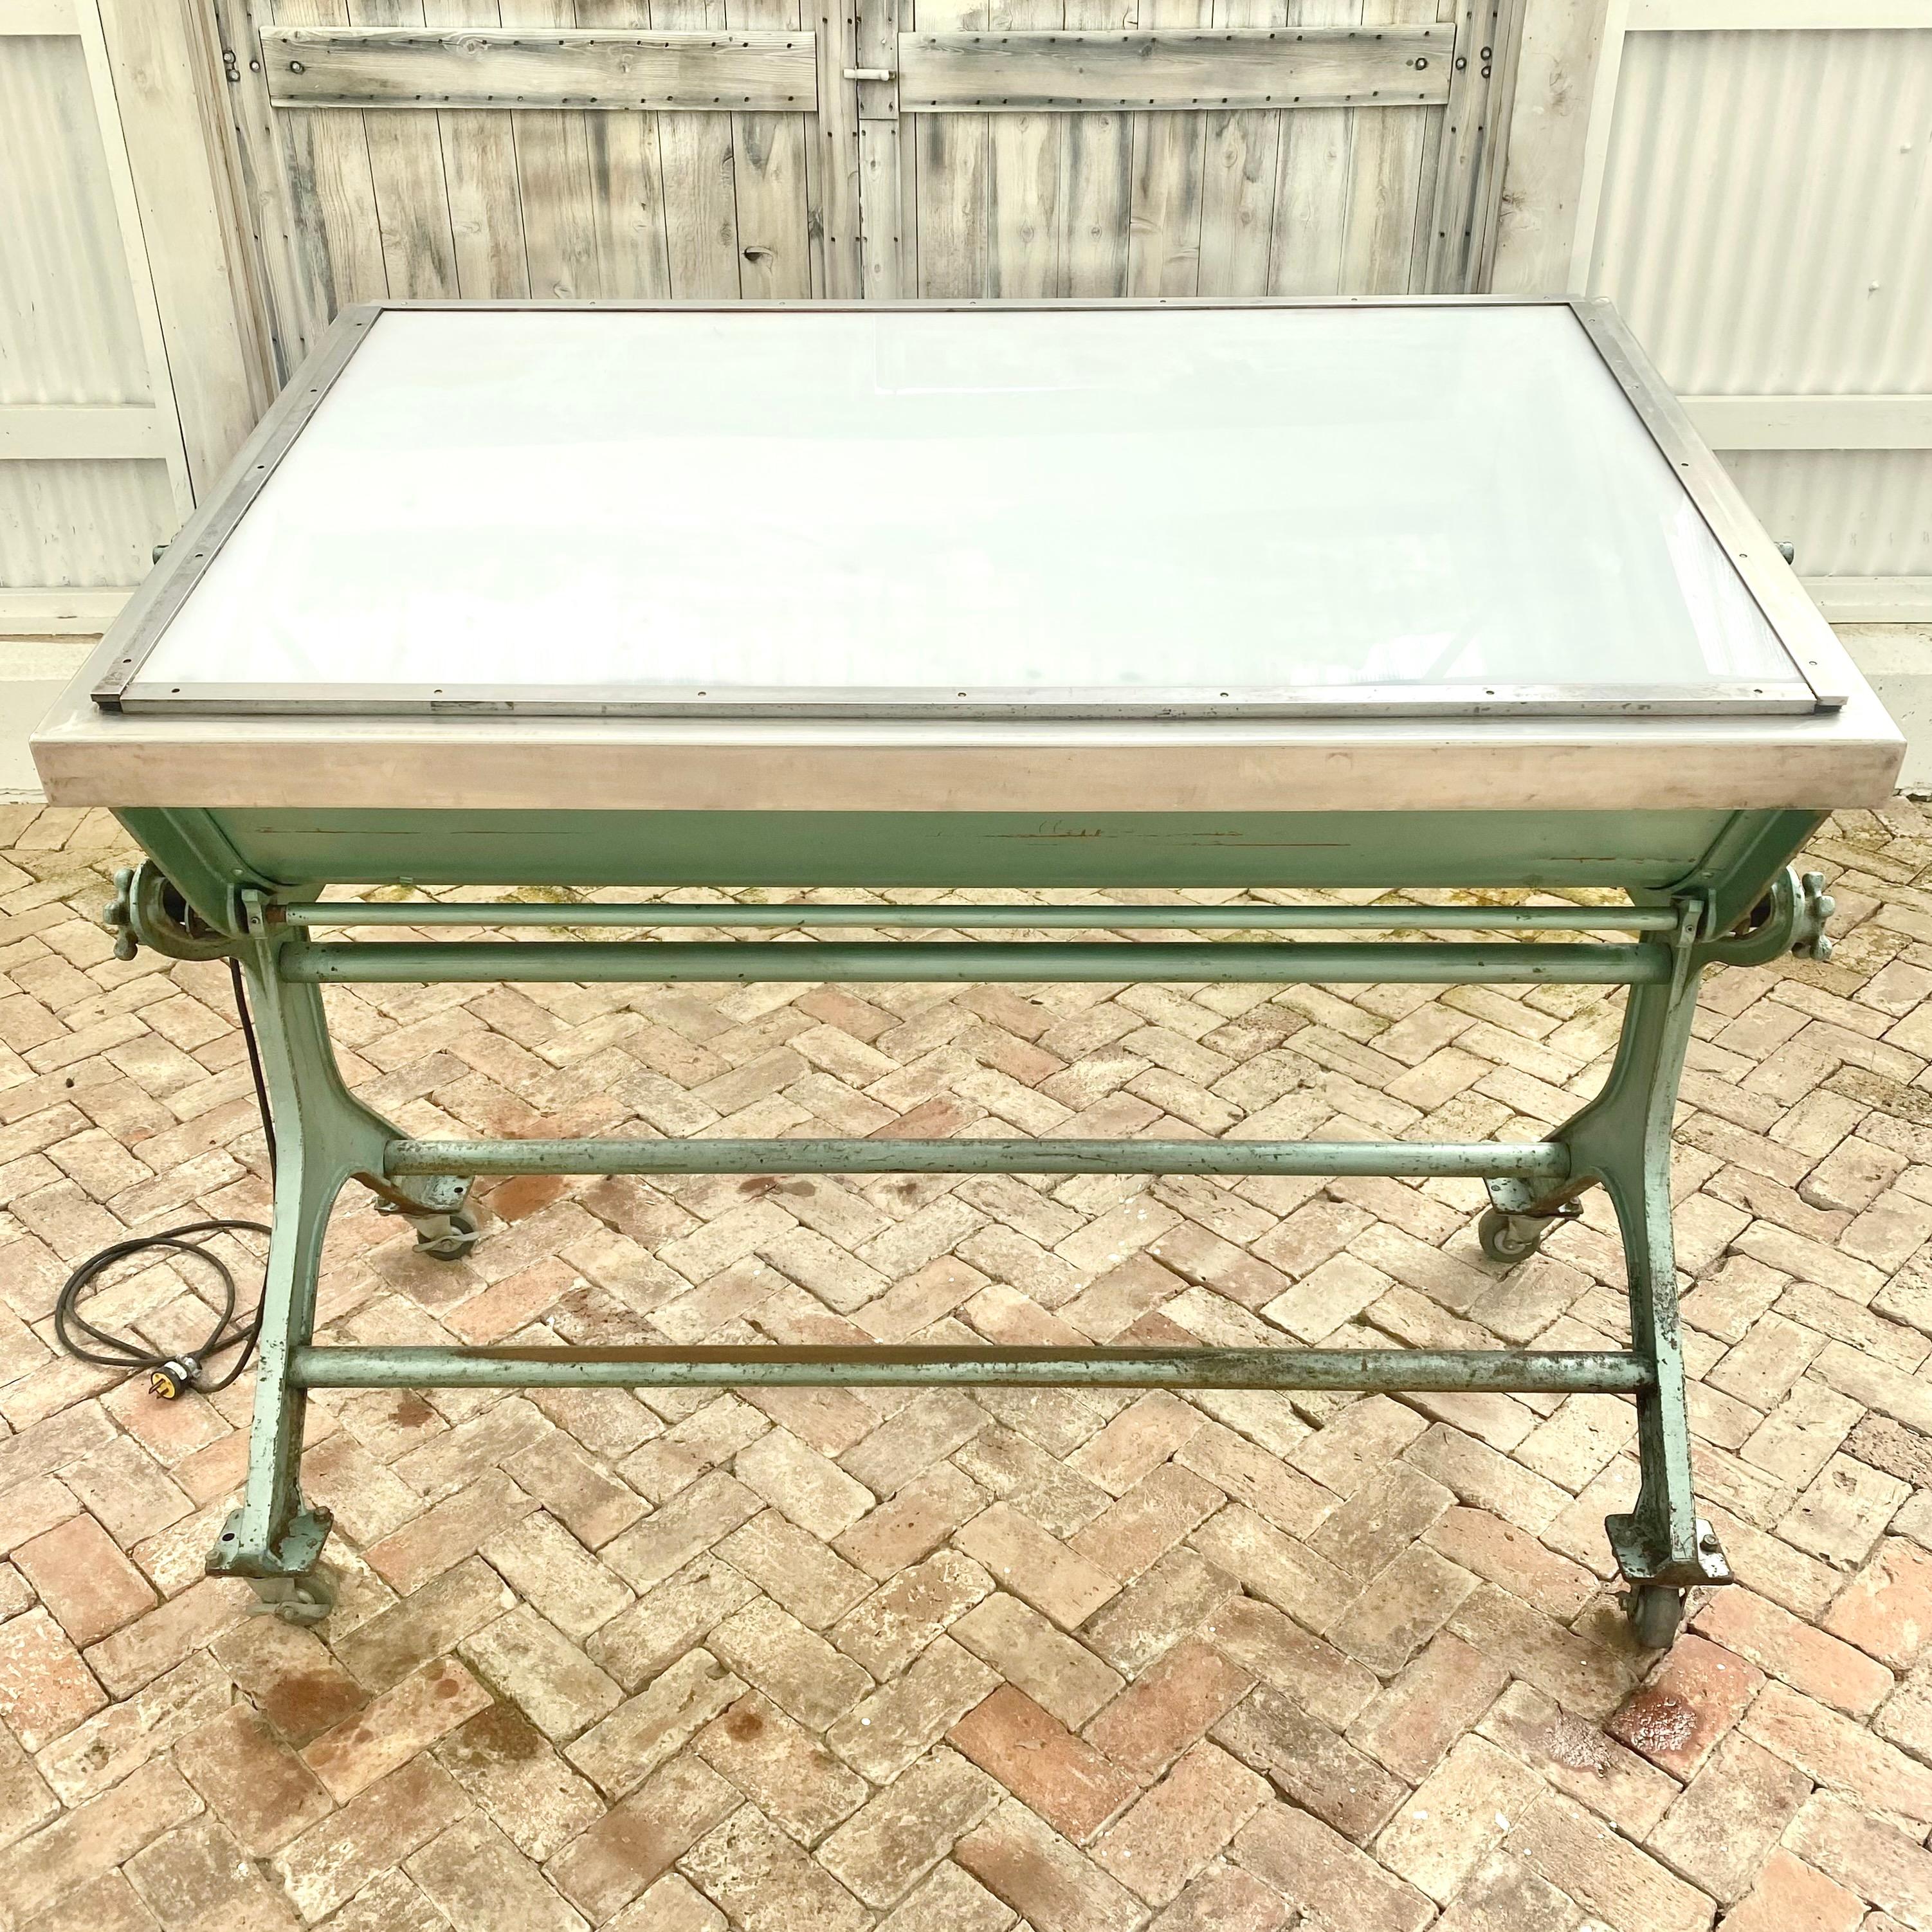 Incredible industrial grade light box drafting table. Extremely heavy and well made in the US, circa 1950s. Glass tabletop allows the light of two enclosed fluorescent tube lights to illuminate the surface. Knobs on either side of the table can be